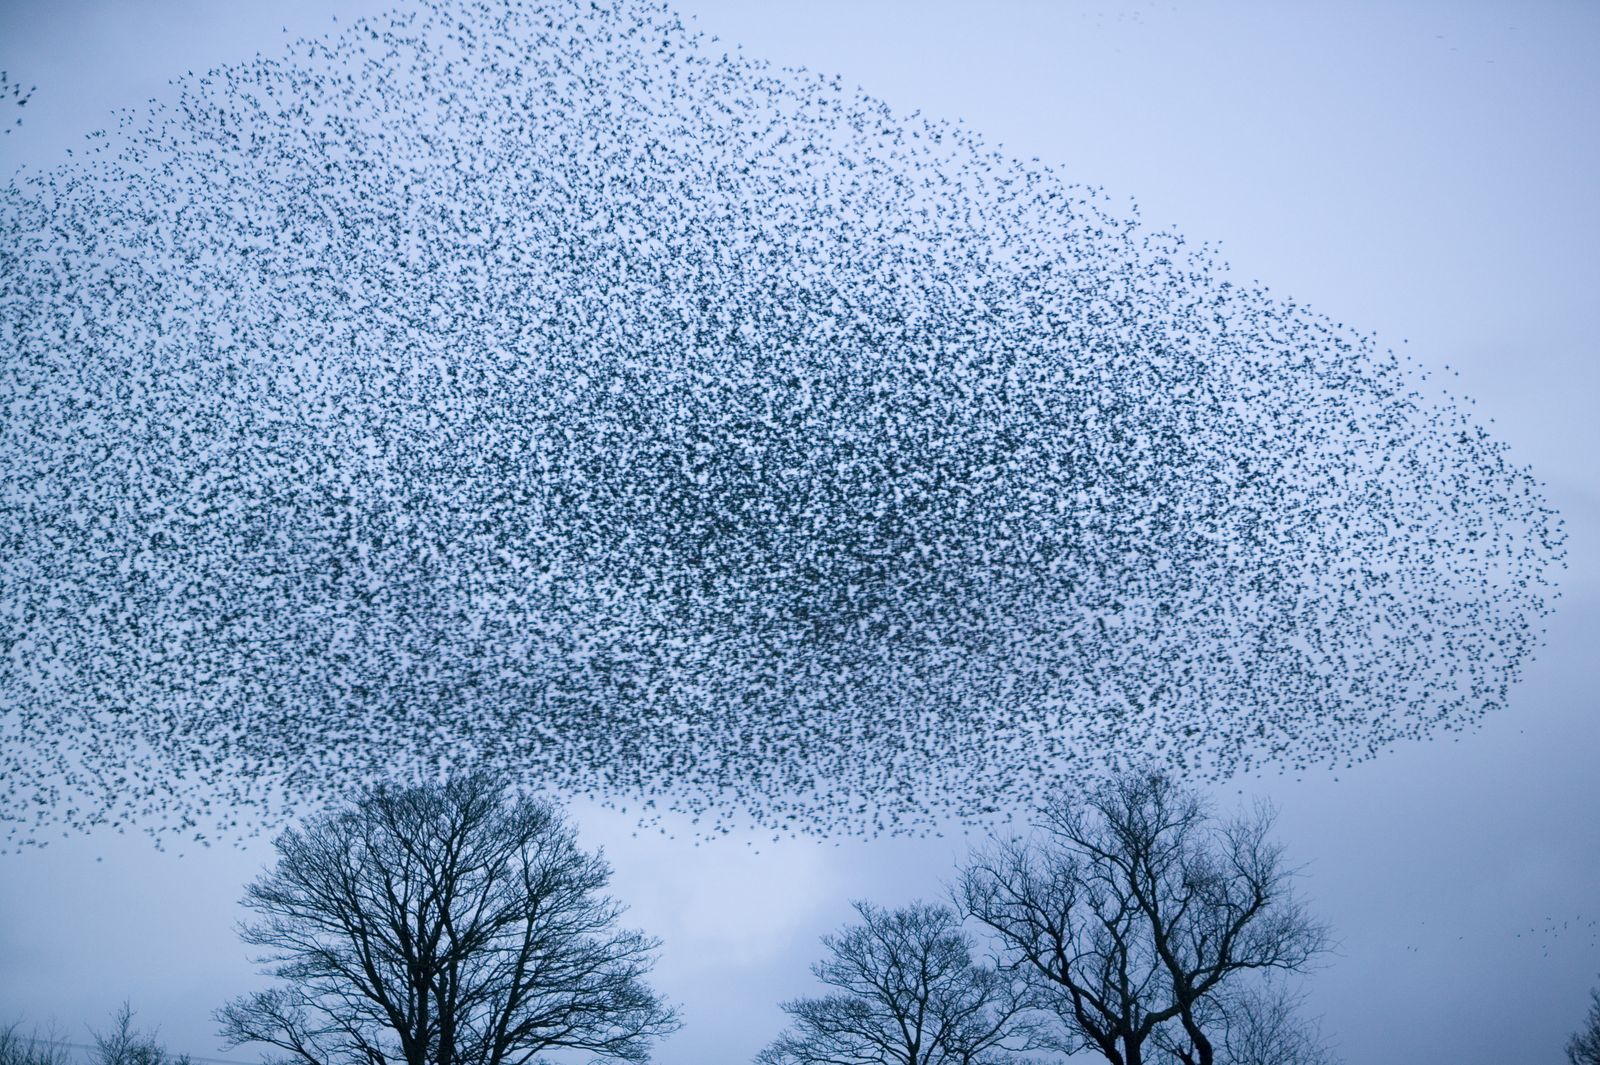 How a Flock of 400 Flying Birds Manages to Turn in Just Half a ...